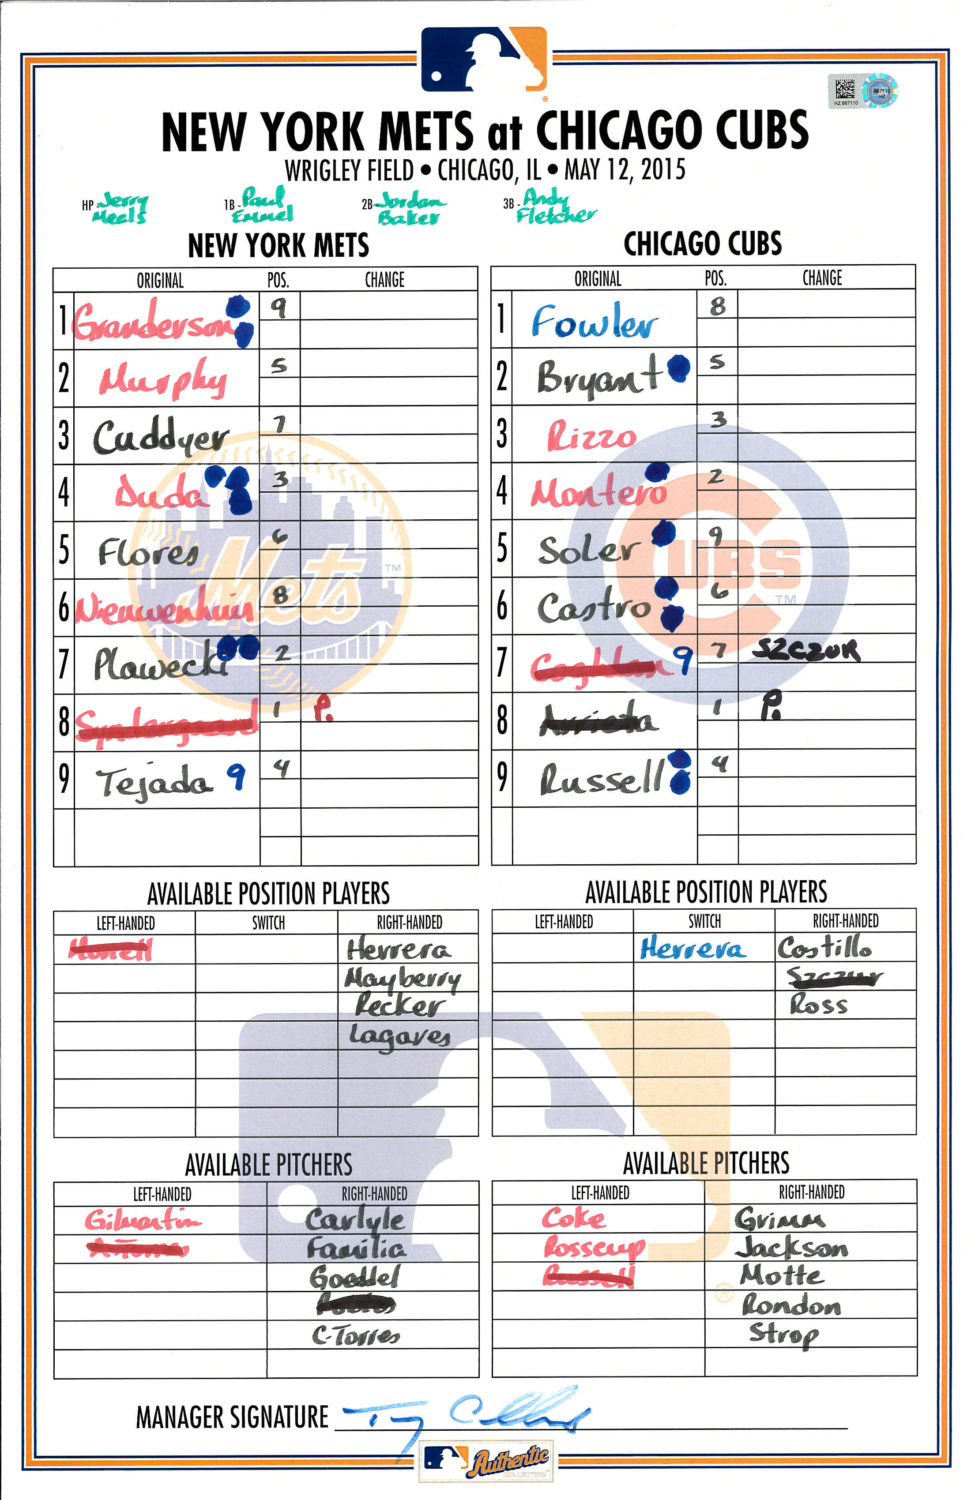 Lineup Card: Syndergaard's MLB Debut vs. Chicago Cubs